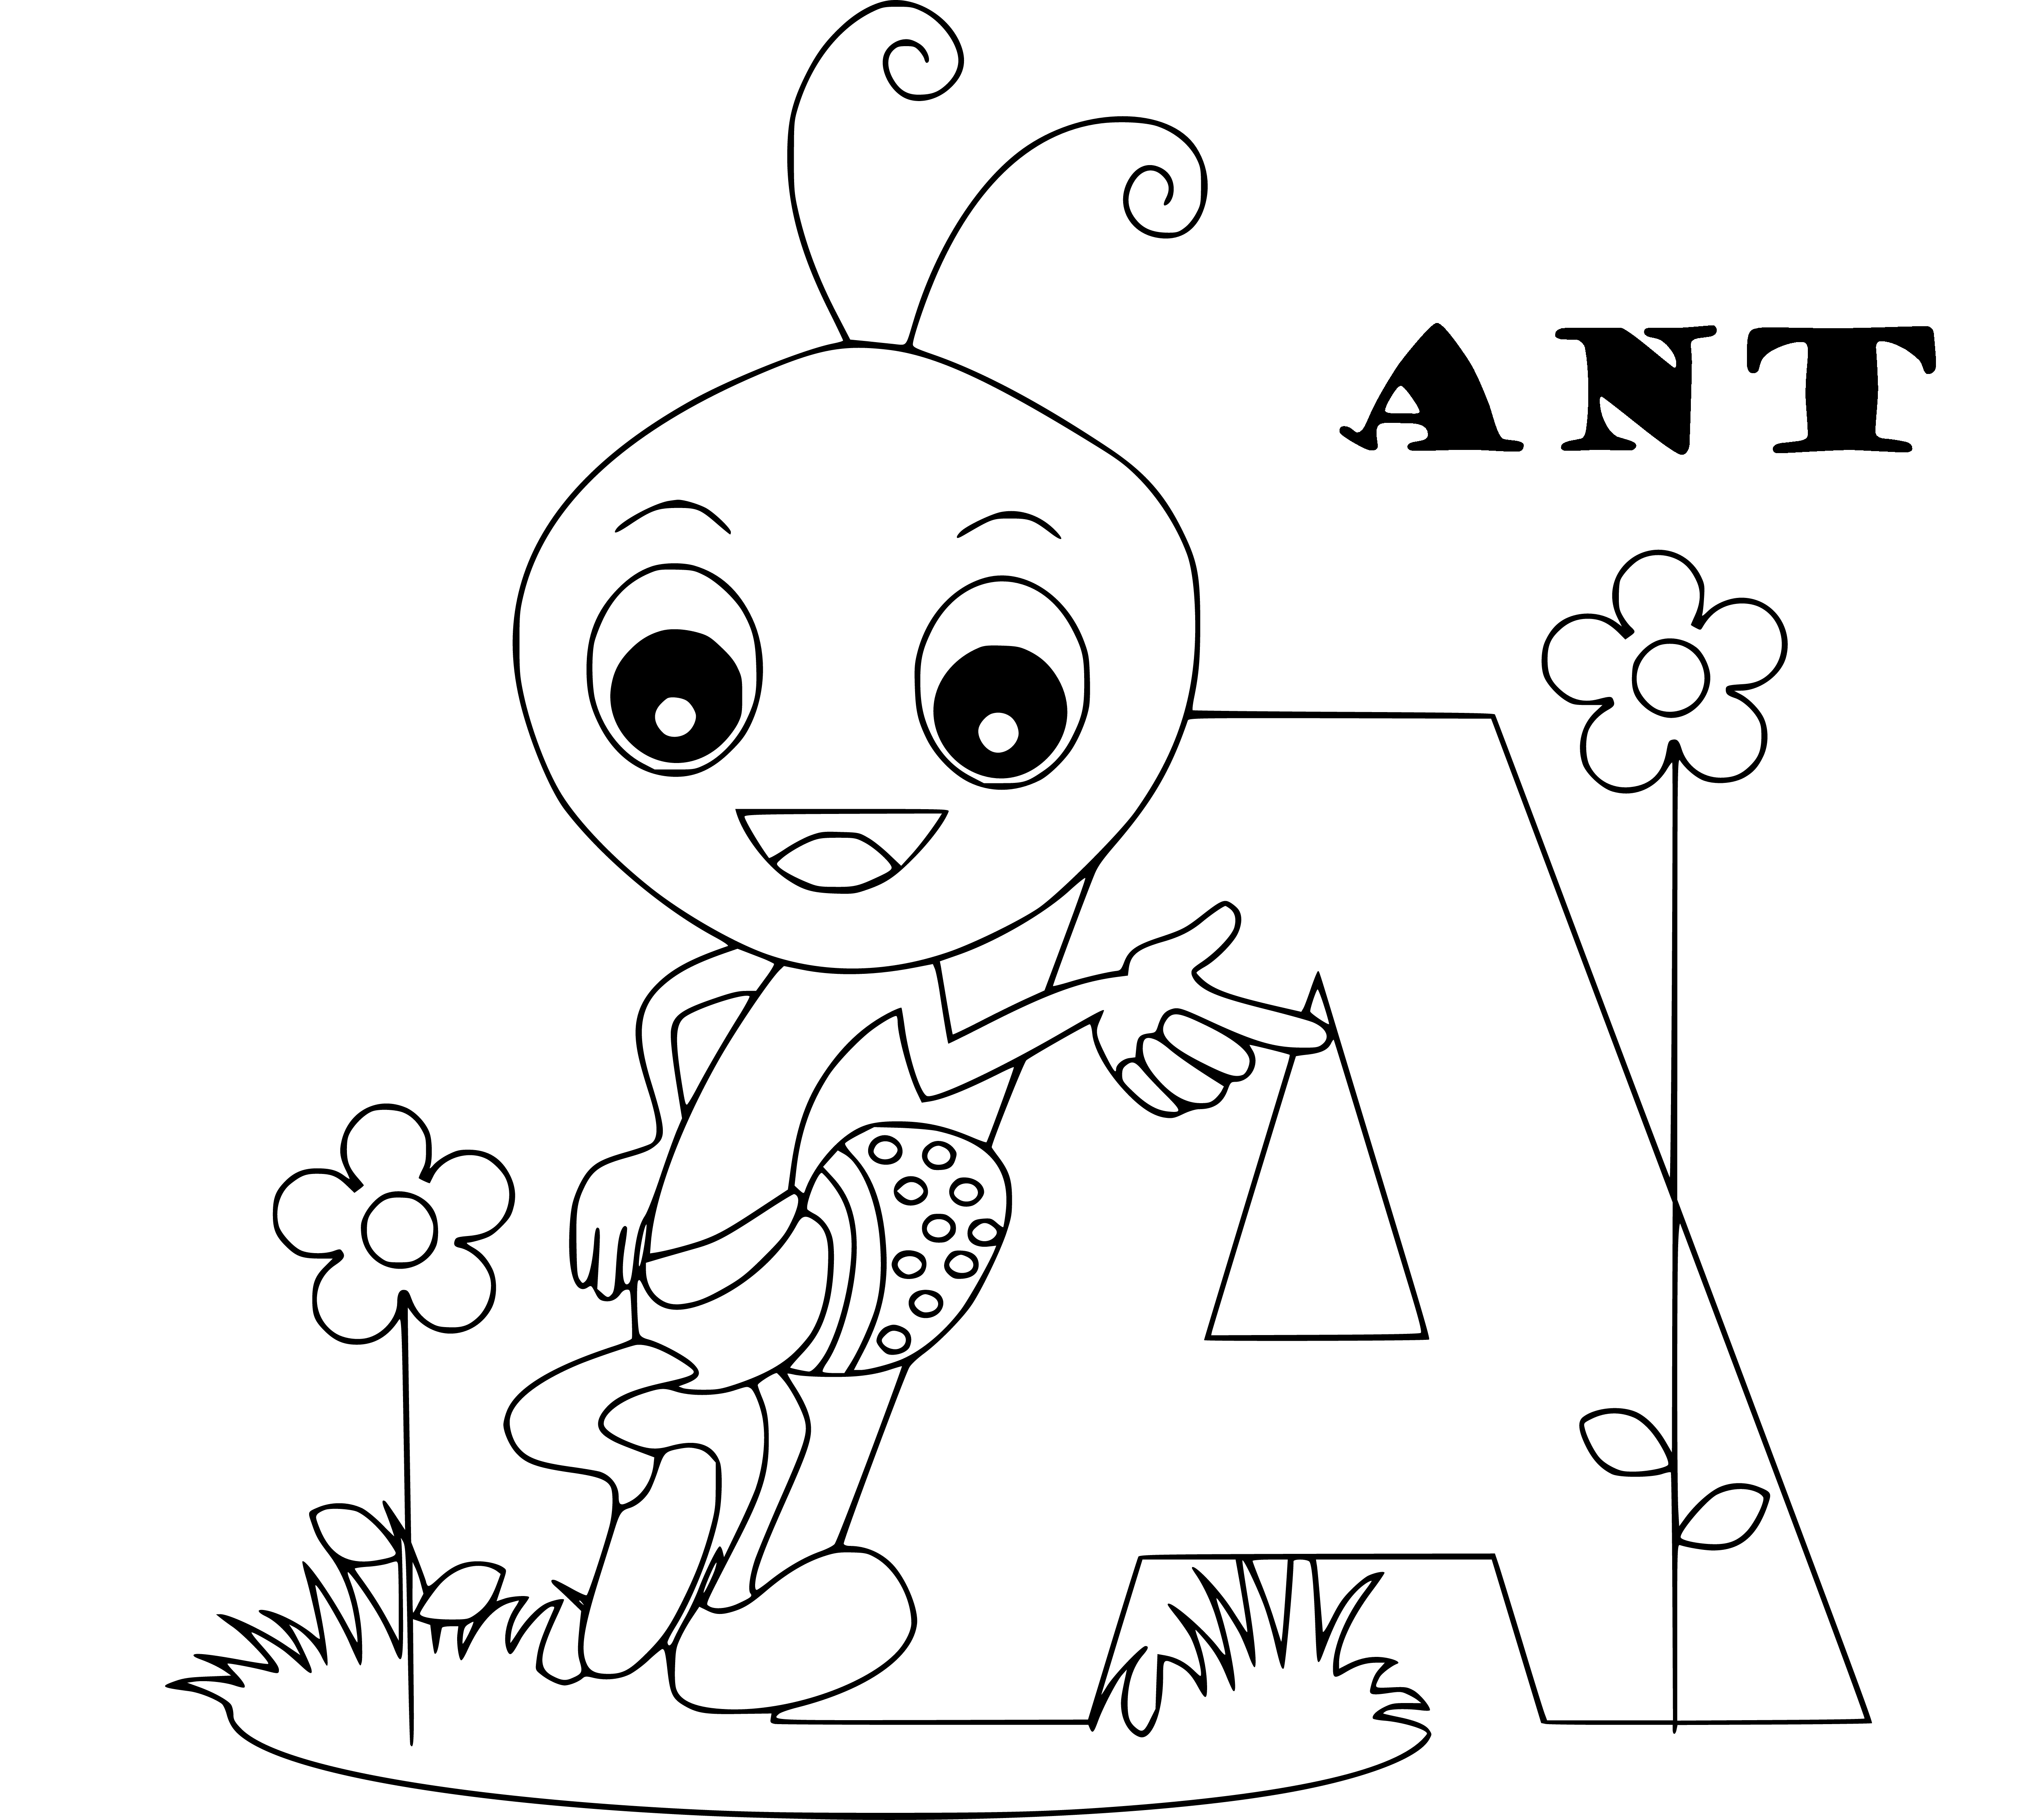 Letter A Painting Page (ant) - SheetalColor.com